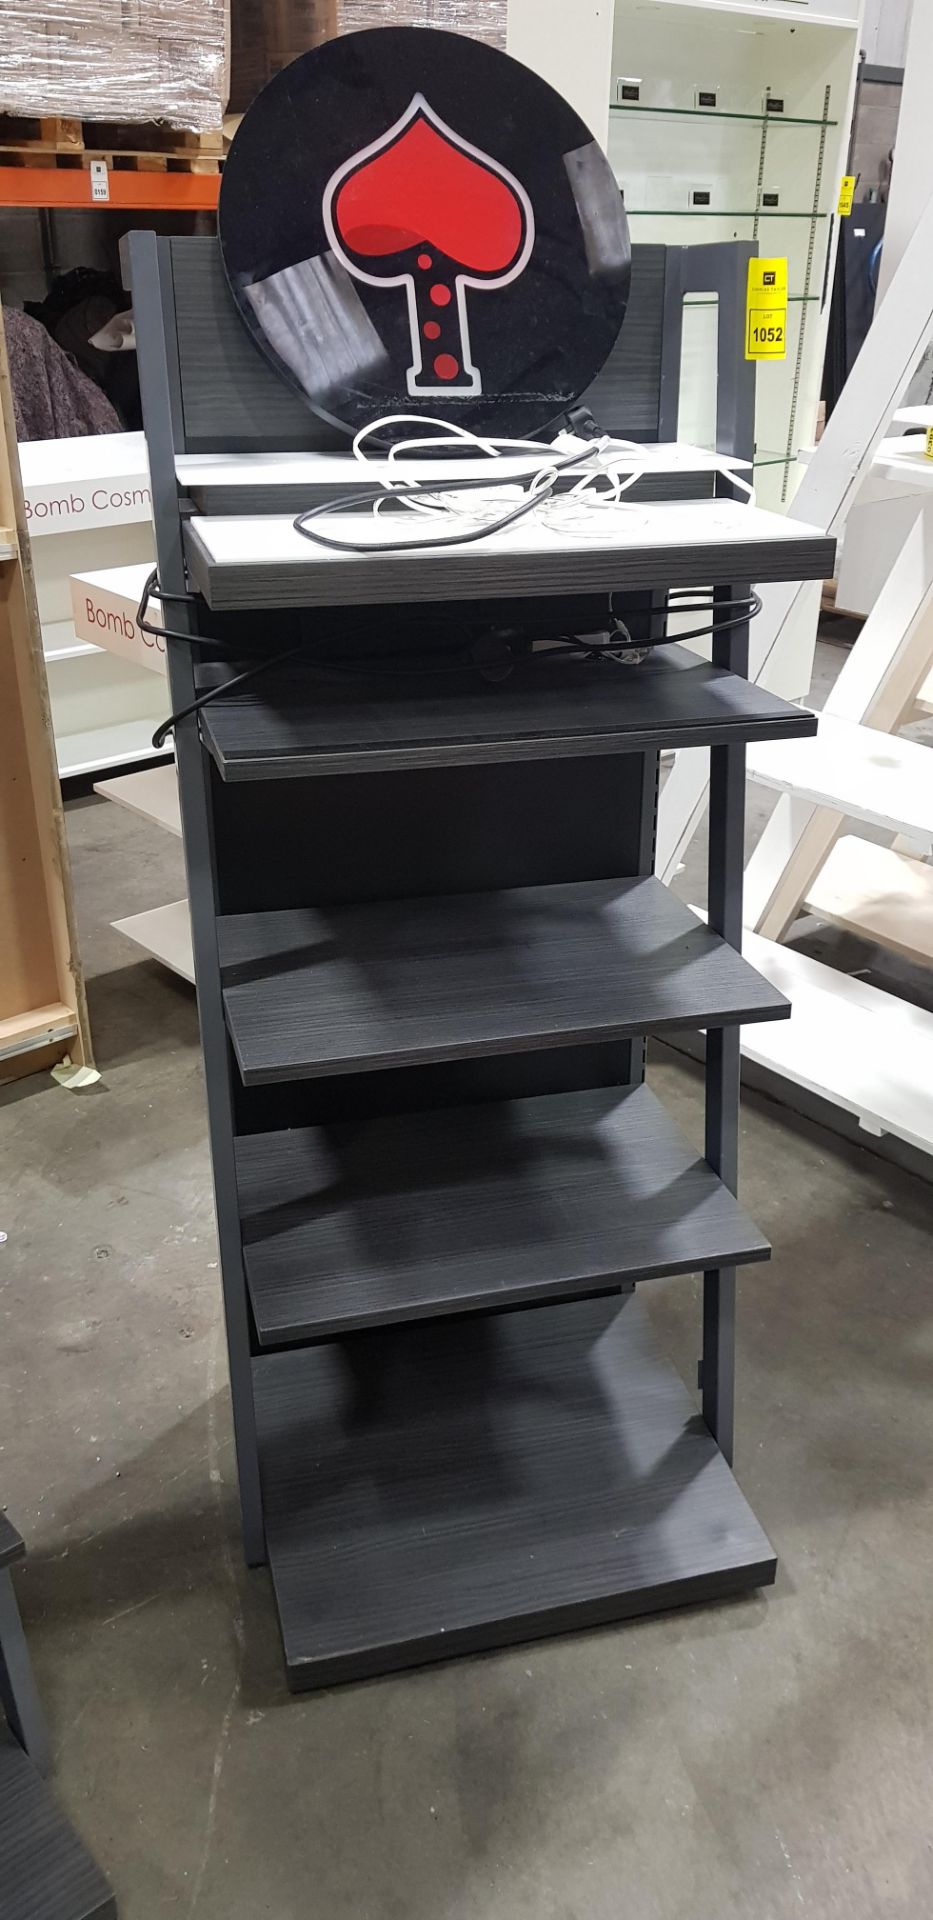 1 X 5 TIER ADJUSTABLE SHELVING UNIT COMES WITH SOCKET EXTENSION AND LED LIGHTS (56CM D X 60CM W X